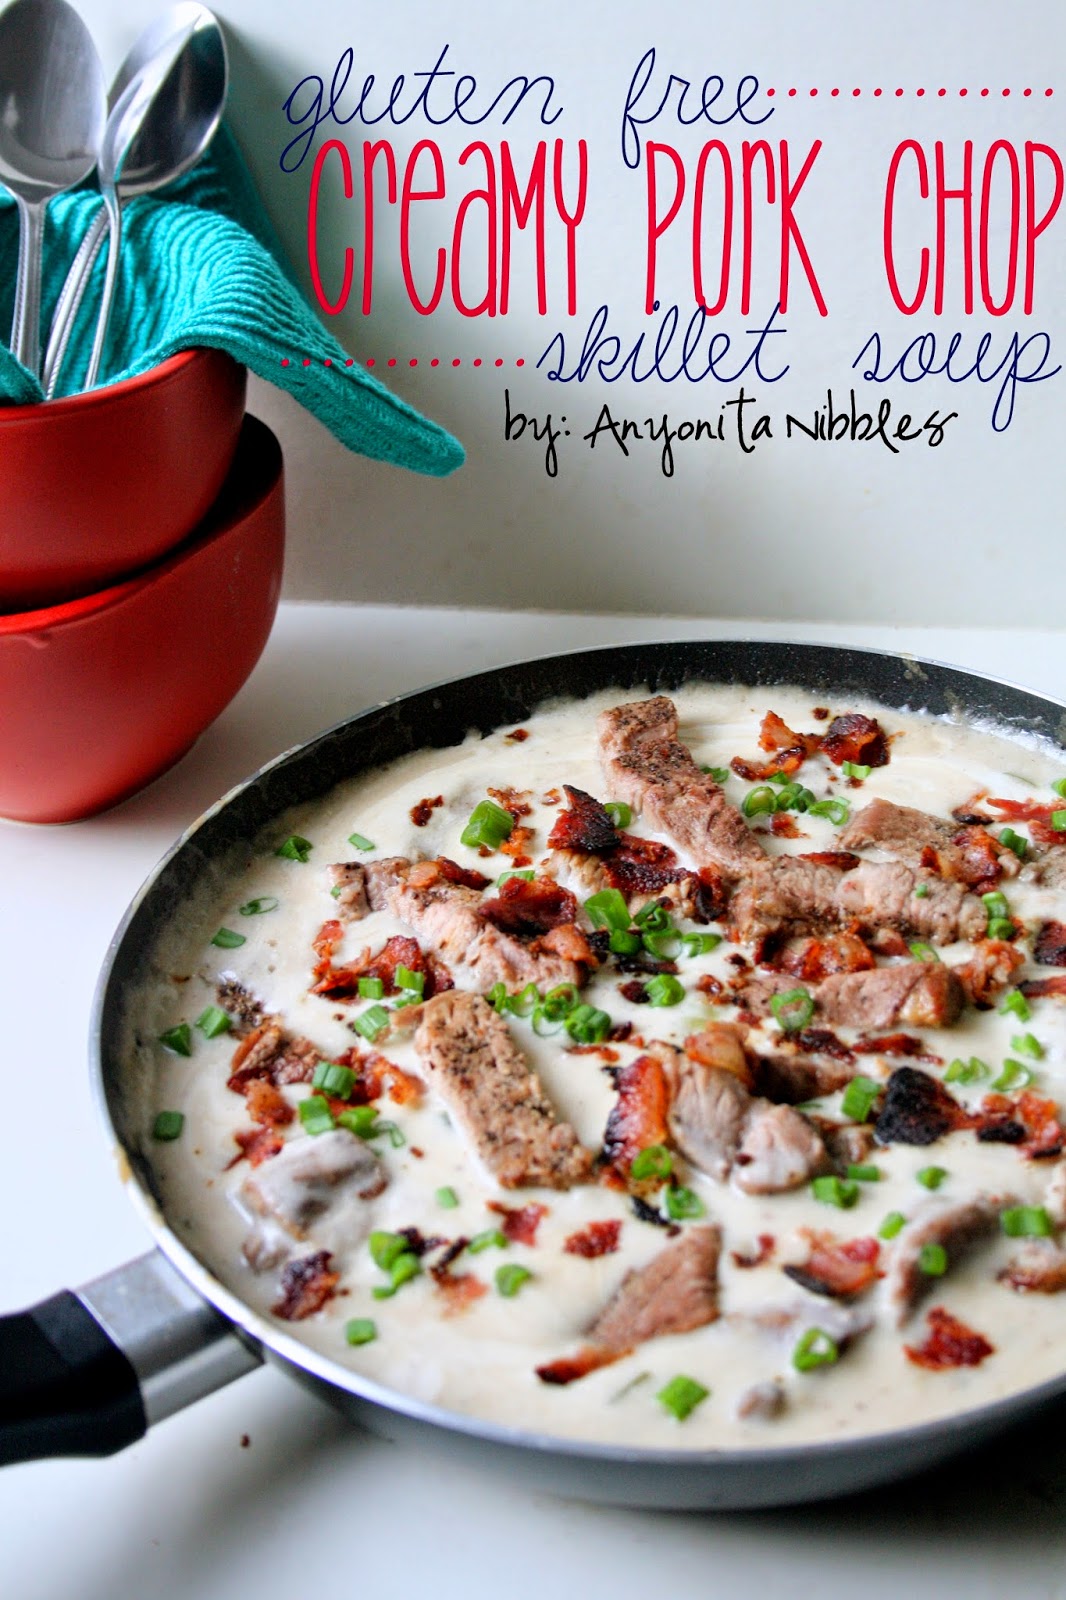 I love that she cooks the pork chops in two ways and uses bacon to make this light and creamy skillet soup.